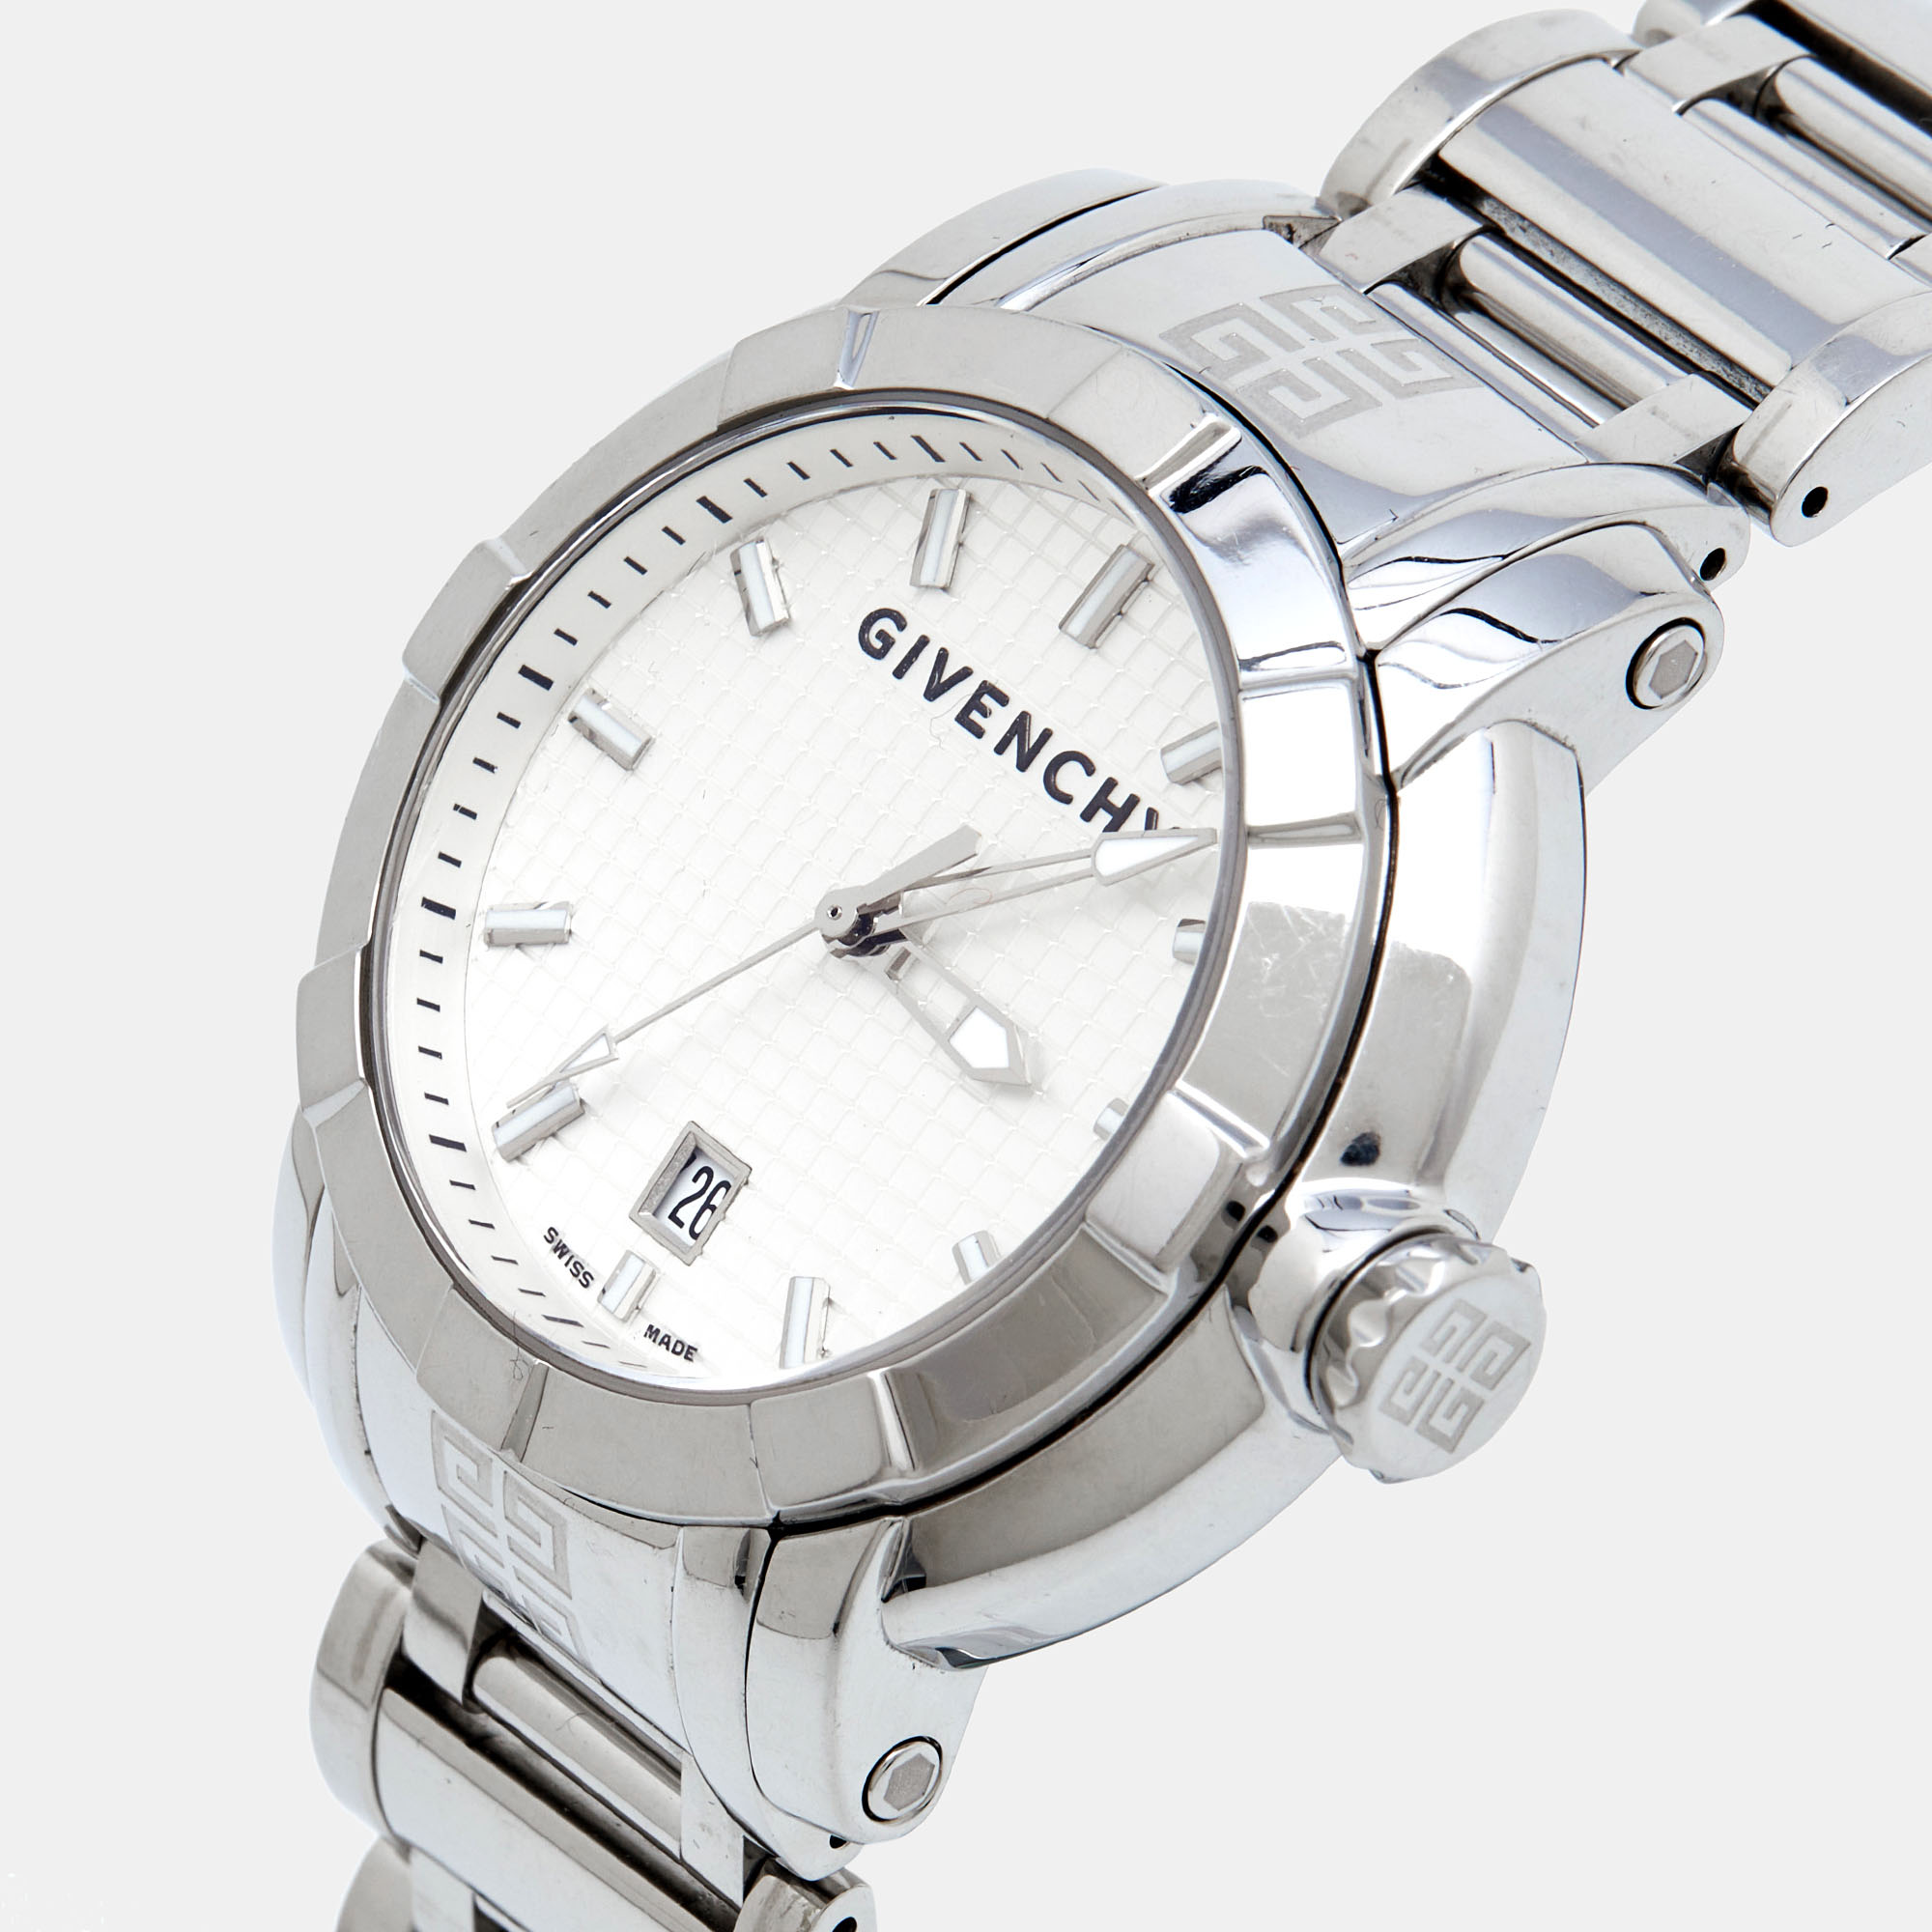 

Givenchy White Stainless Steel GV.5202M Men's Wristwatch, Silver